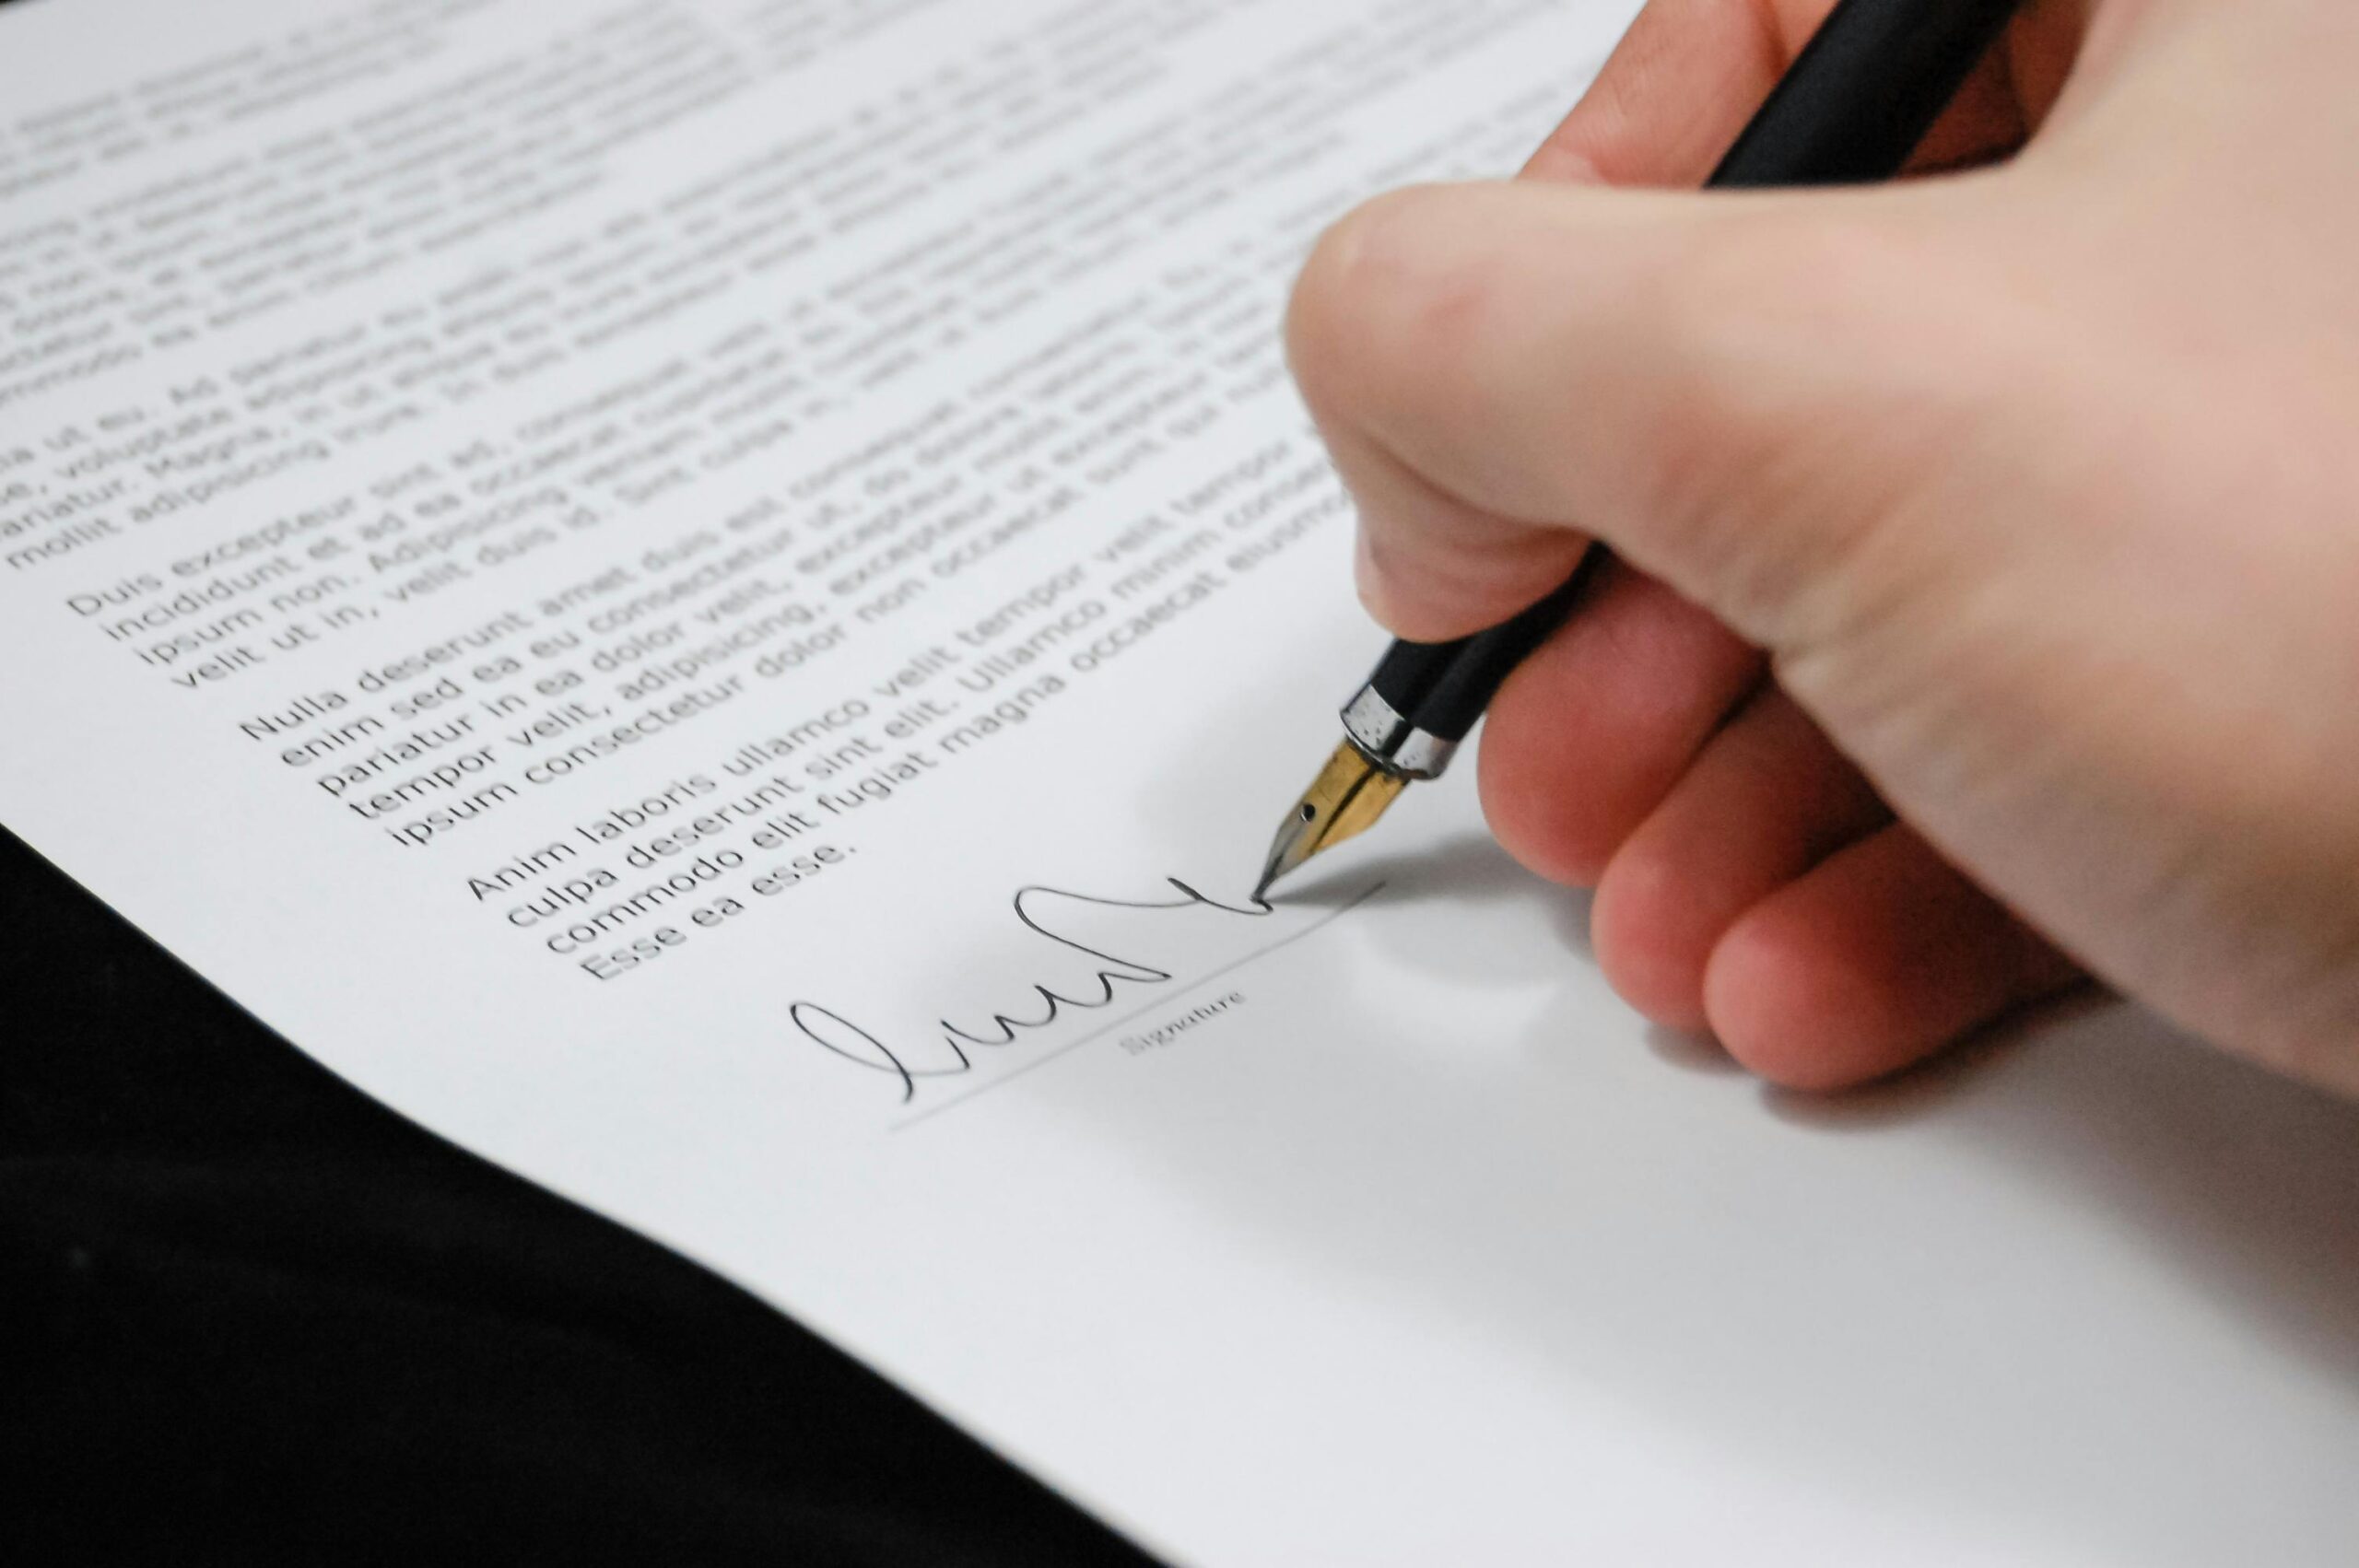 hand signing legal document with calligraphy pen